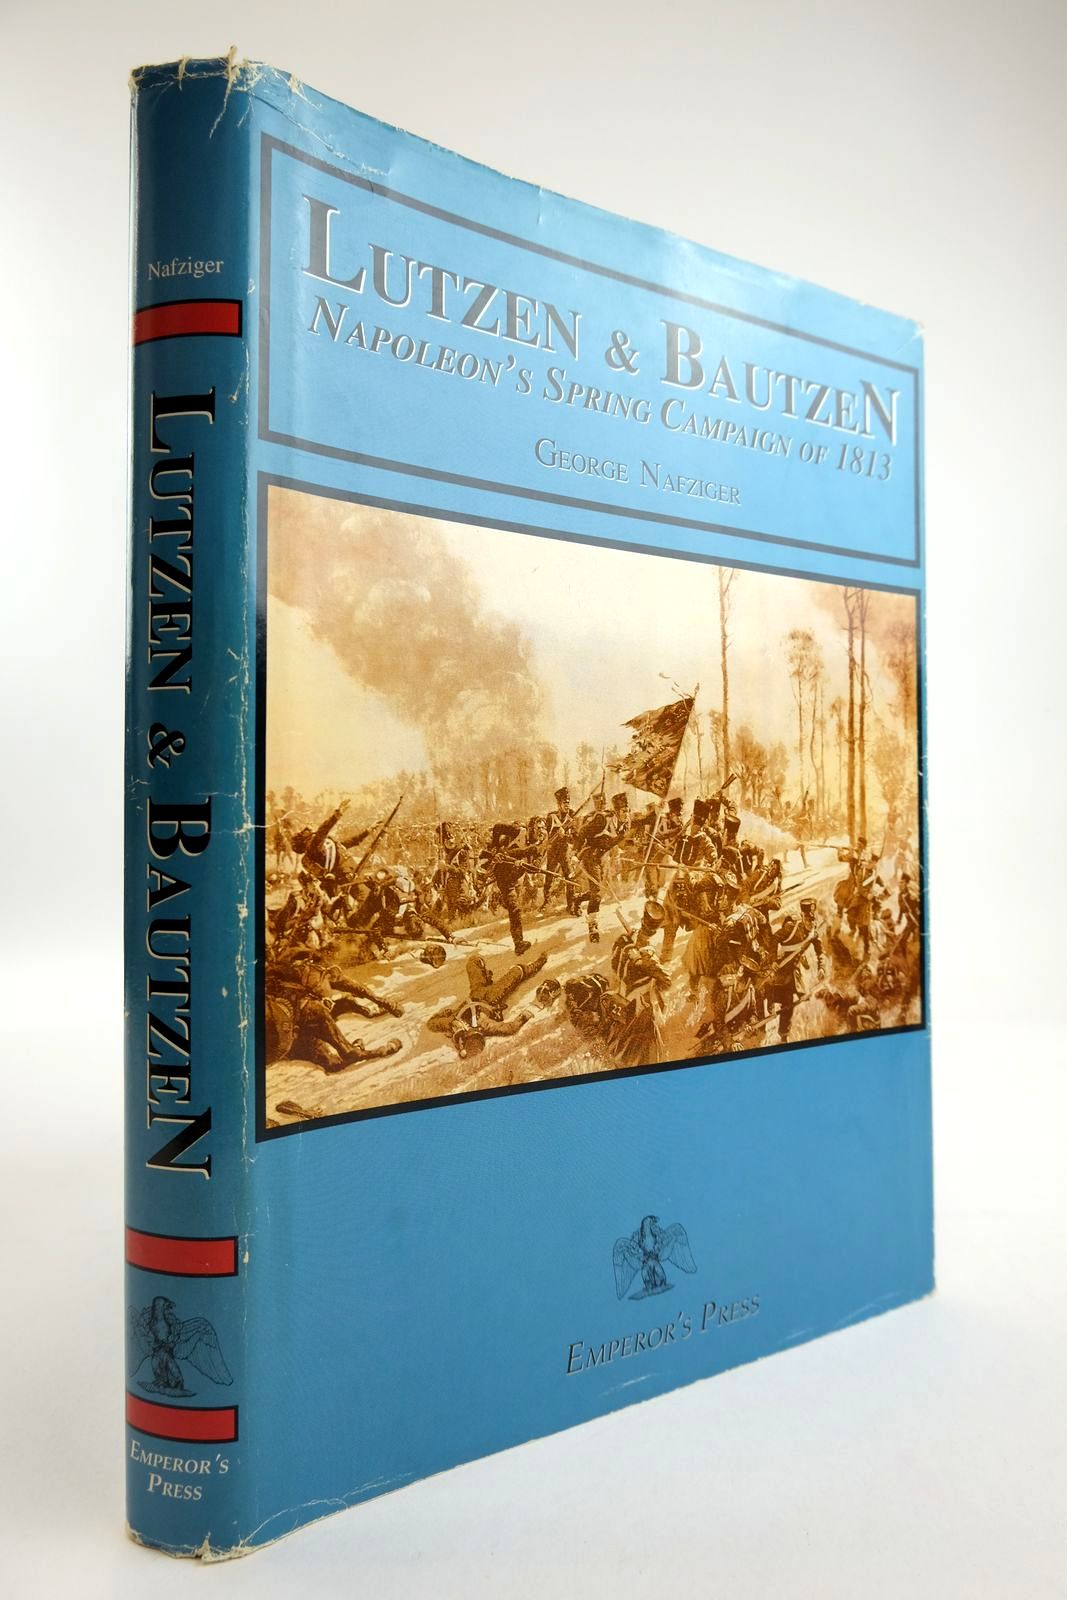 Photo of LUTZEN &AMP; BAUTZEN NAPOLEONS SPRING CAMPAIGN OF 1813 written by Nafziger, George published by Emperor's Press (STOCK CODE: 2134164)  for sale by Stella & Rose's Books